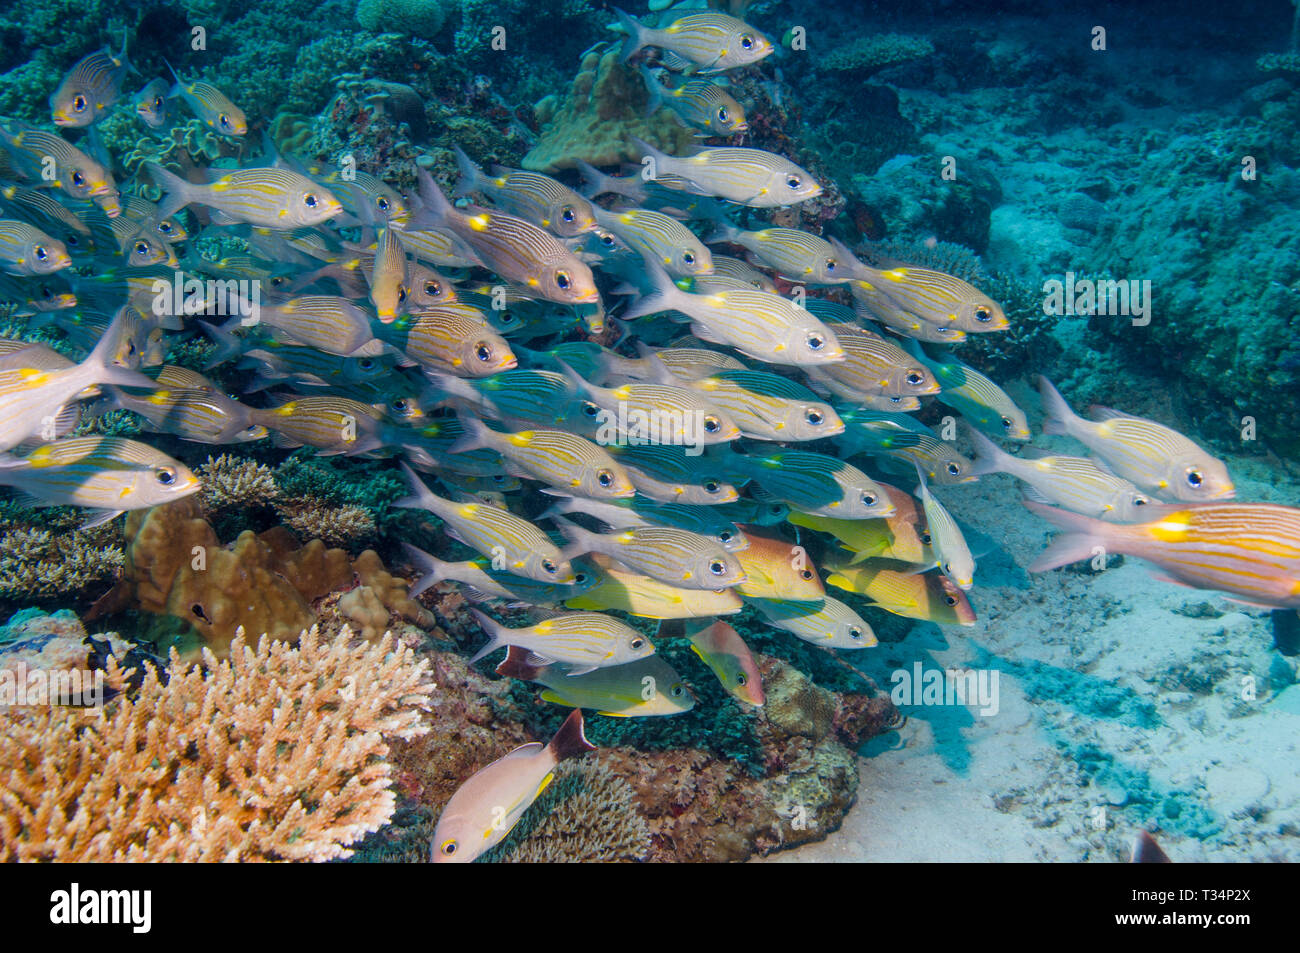 Goldspot seabream or Striped large-eye bream [Gnathodentex aureolineatus], a species of Emperore, school over coral reef. Maldives.  Indian Ocean. Stock Photo